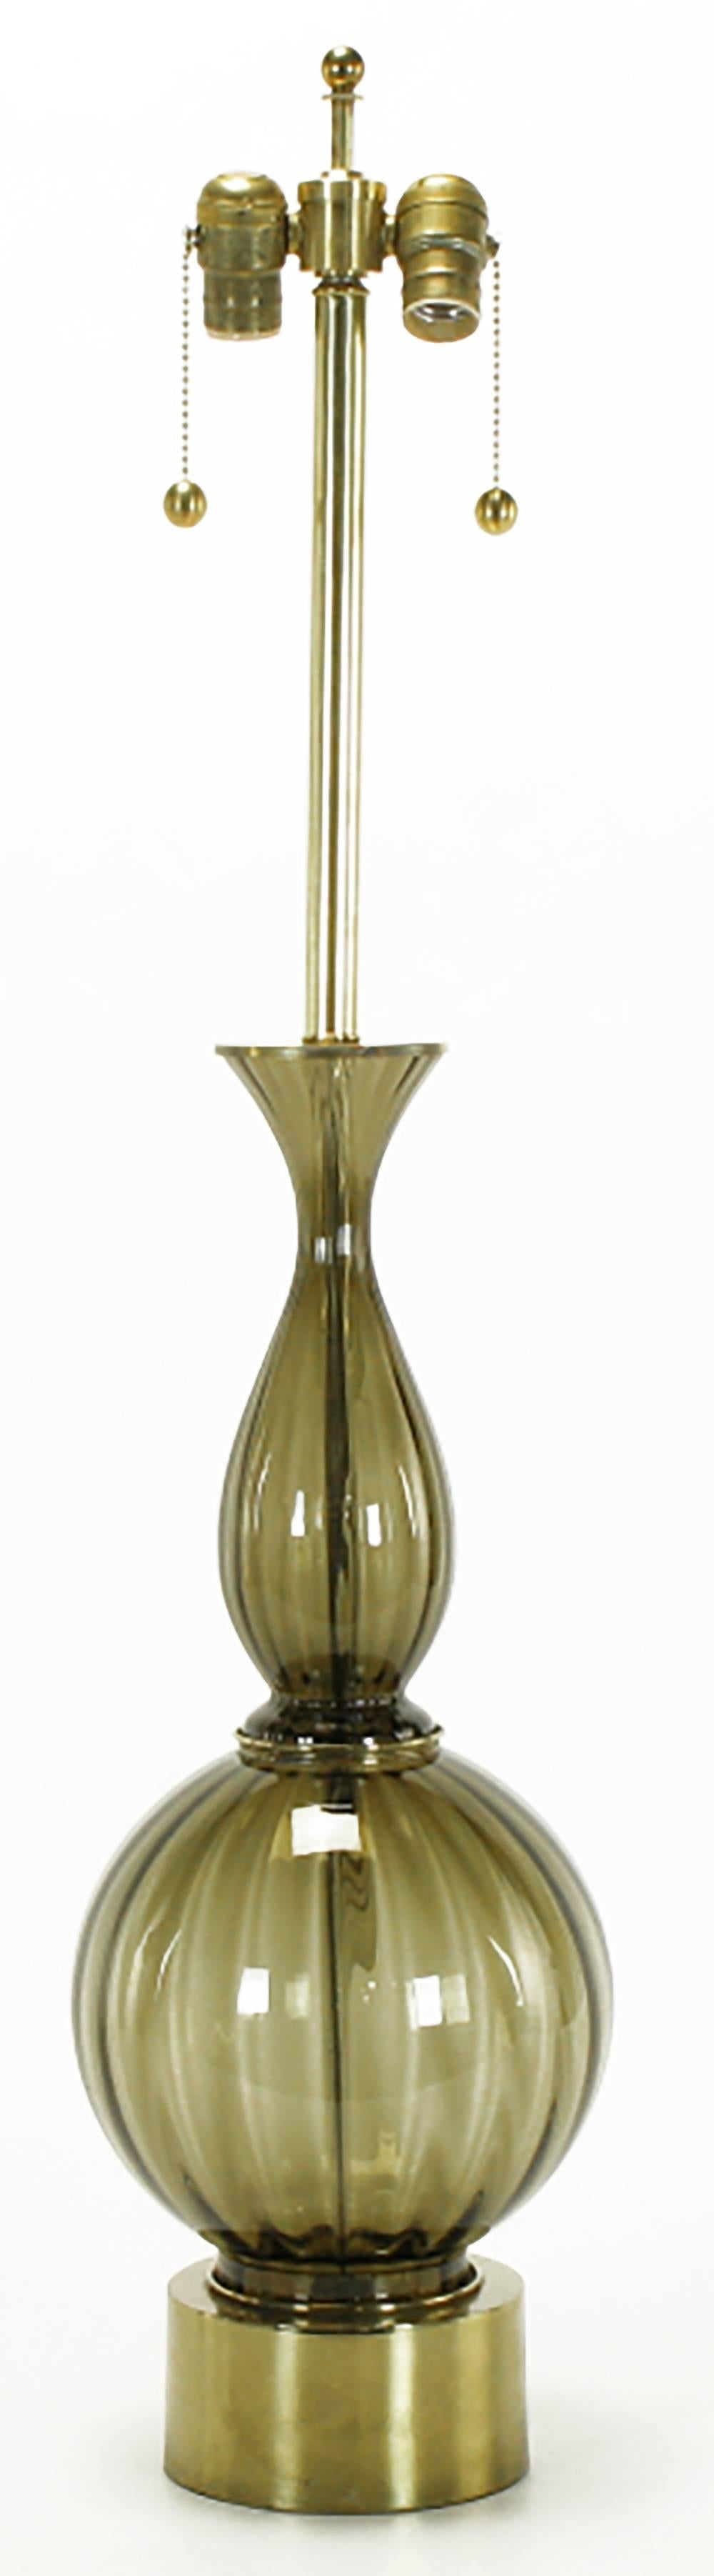 Excellent fluted and smoked Murano glass sinuous table lamp. Brass pedestal base with fluted ball brass disc spacer and vase shaped top. Brass stem and double socket cluster. Sold sans shade.